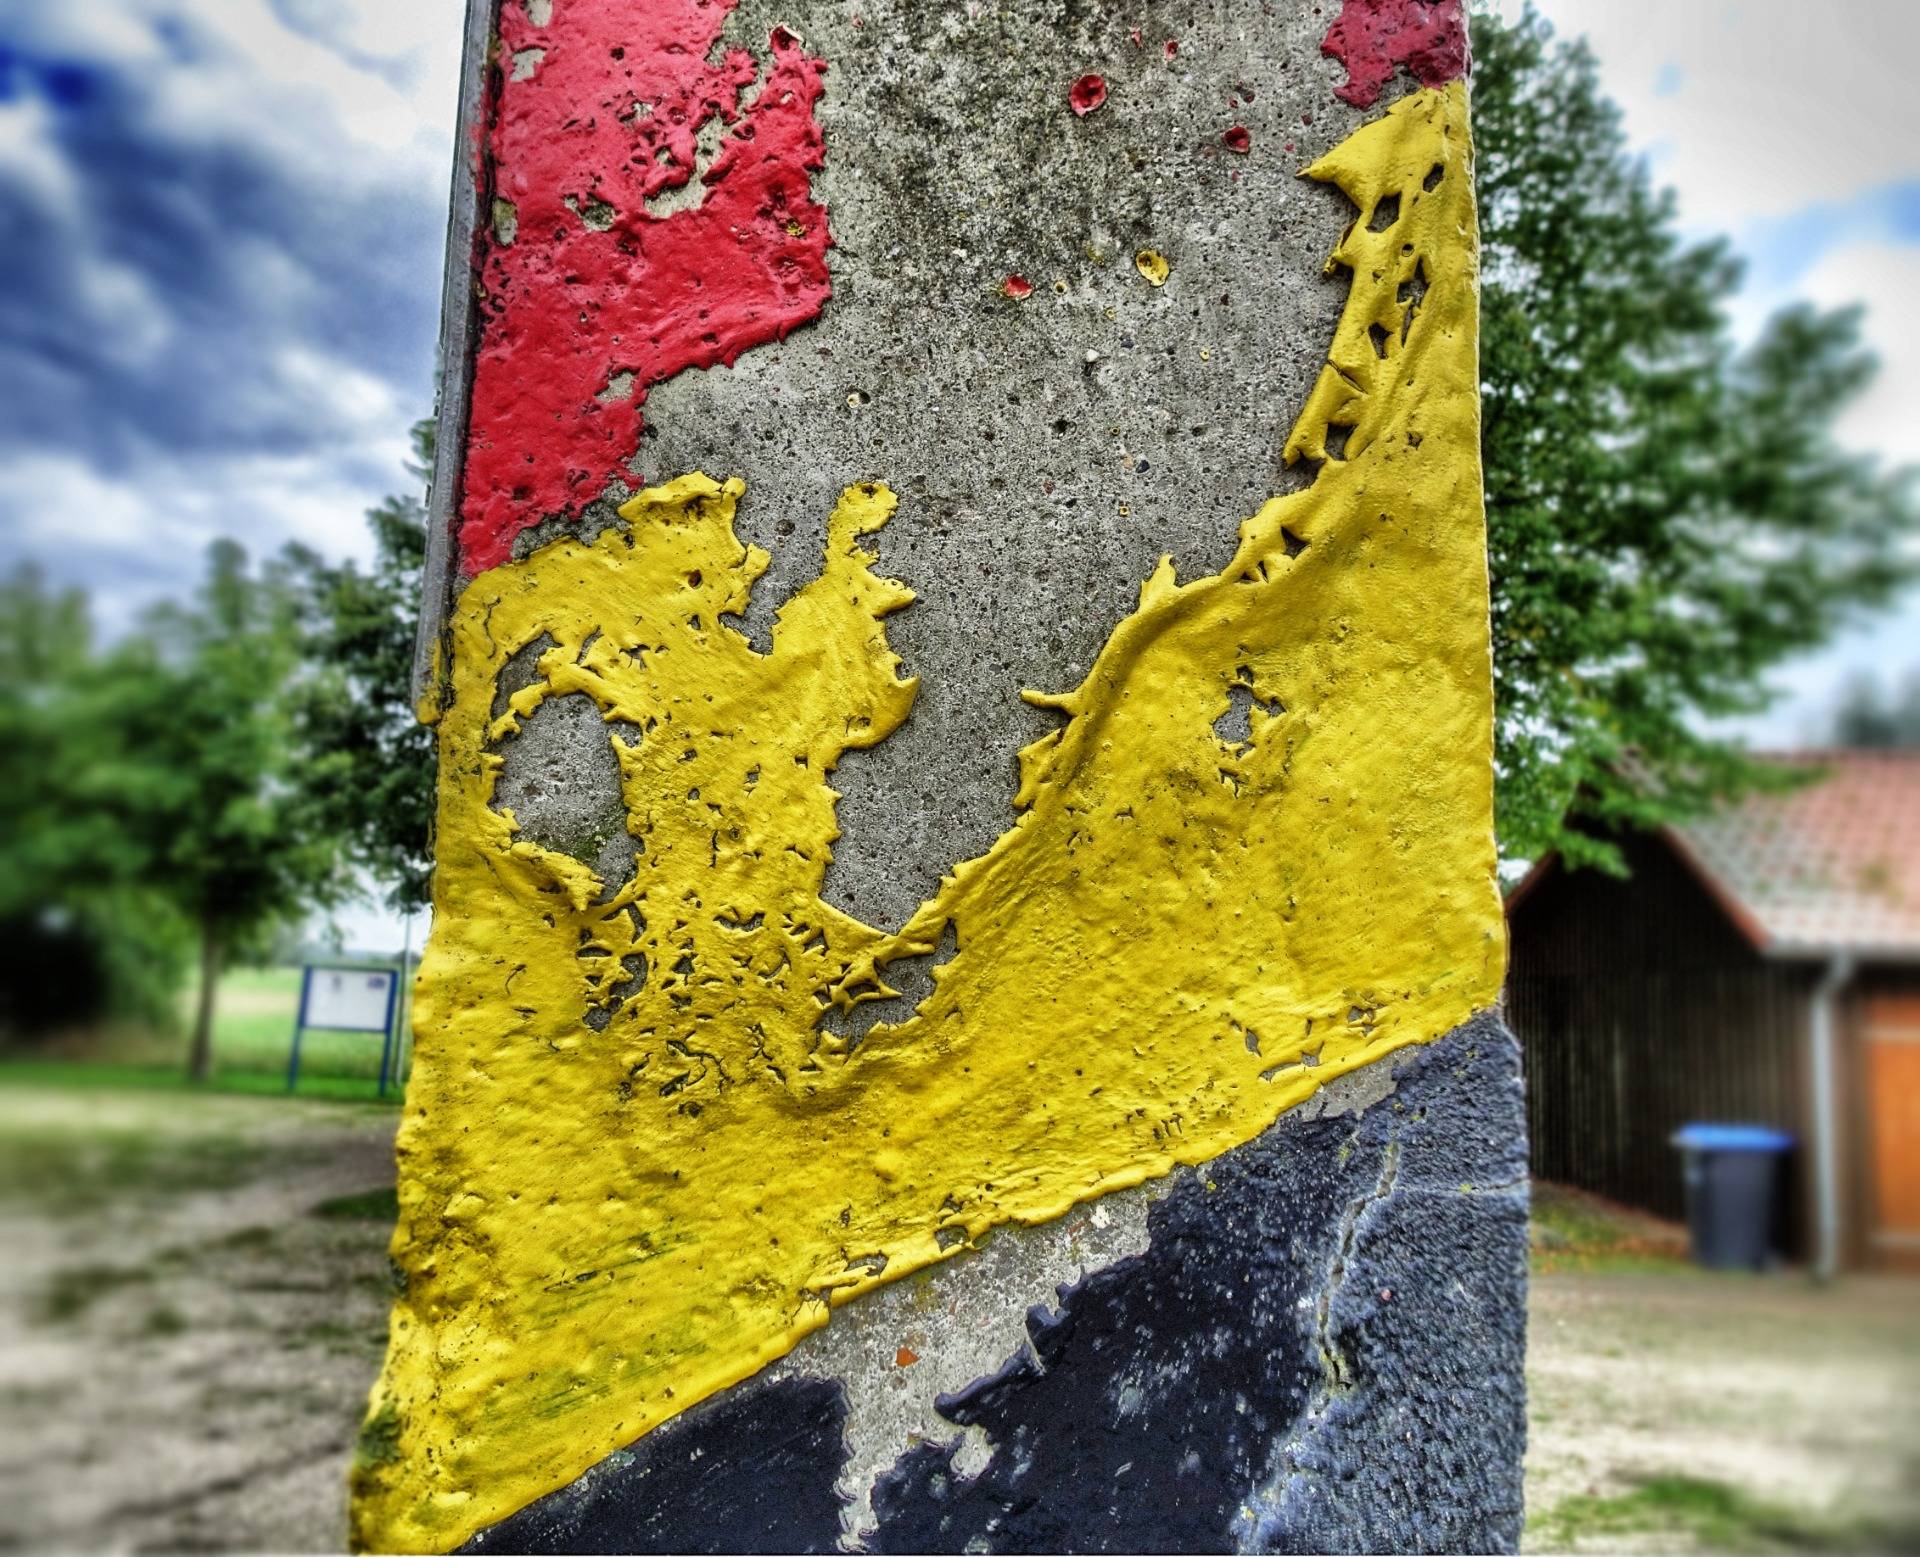 Remains, remains: One of the last border poles along the former Iron curtain.